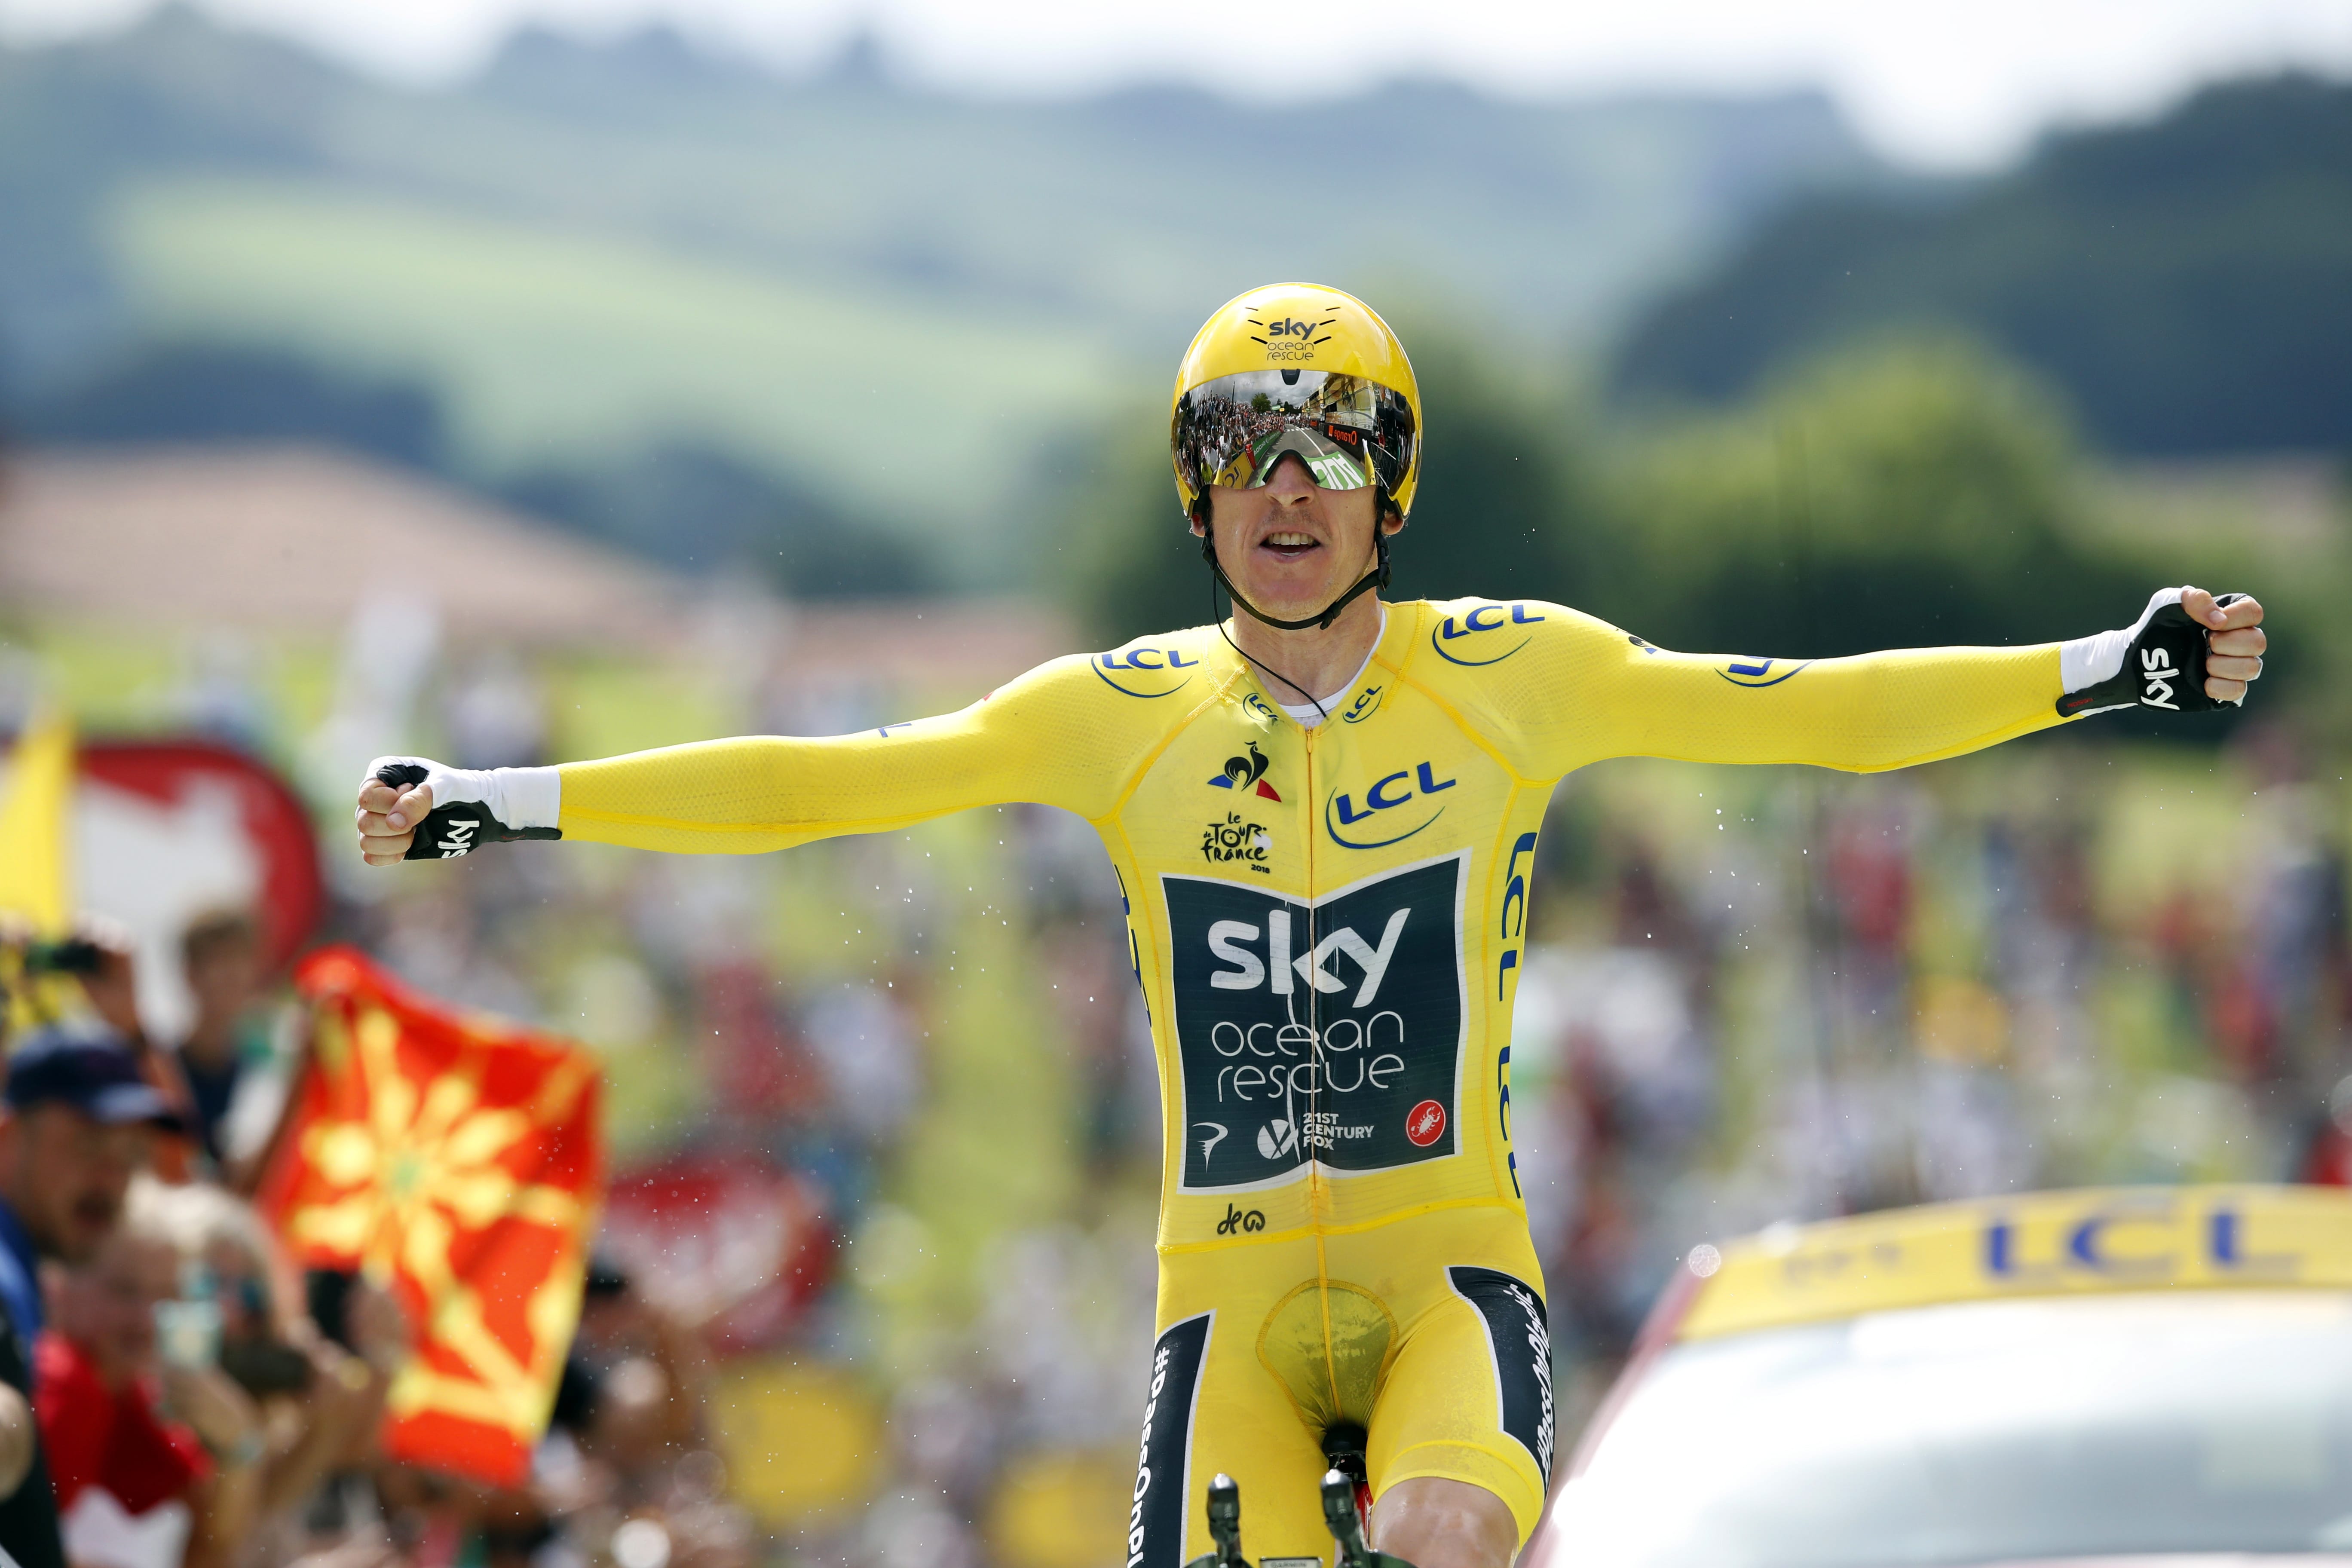 Thomas effectively seals his first Tour de France title The Columbian